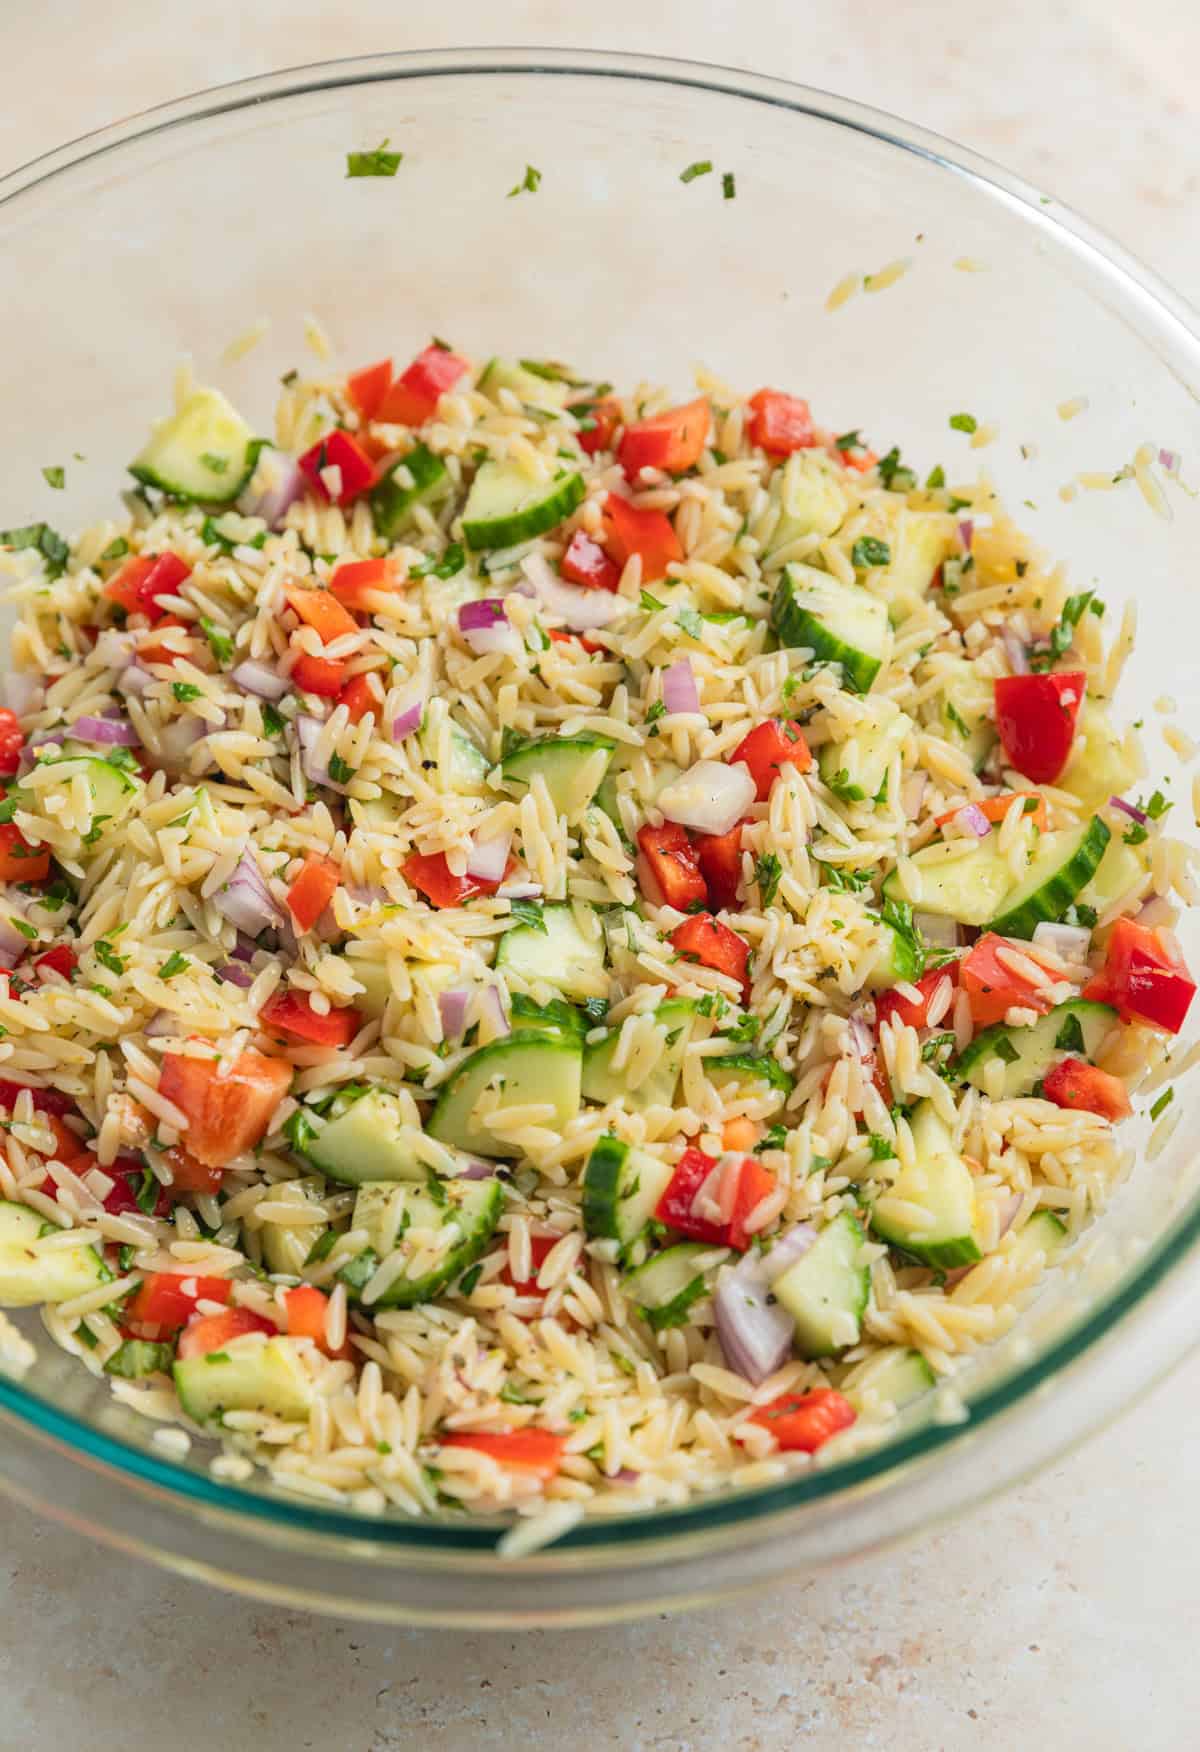 Orzo salad ingredients tossed together in glass mixing bowl before adding feta.